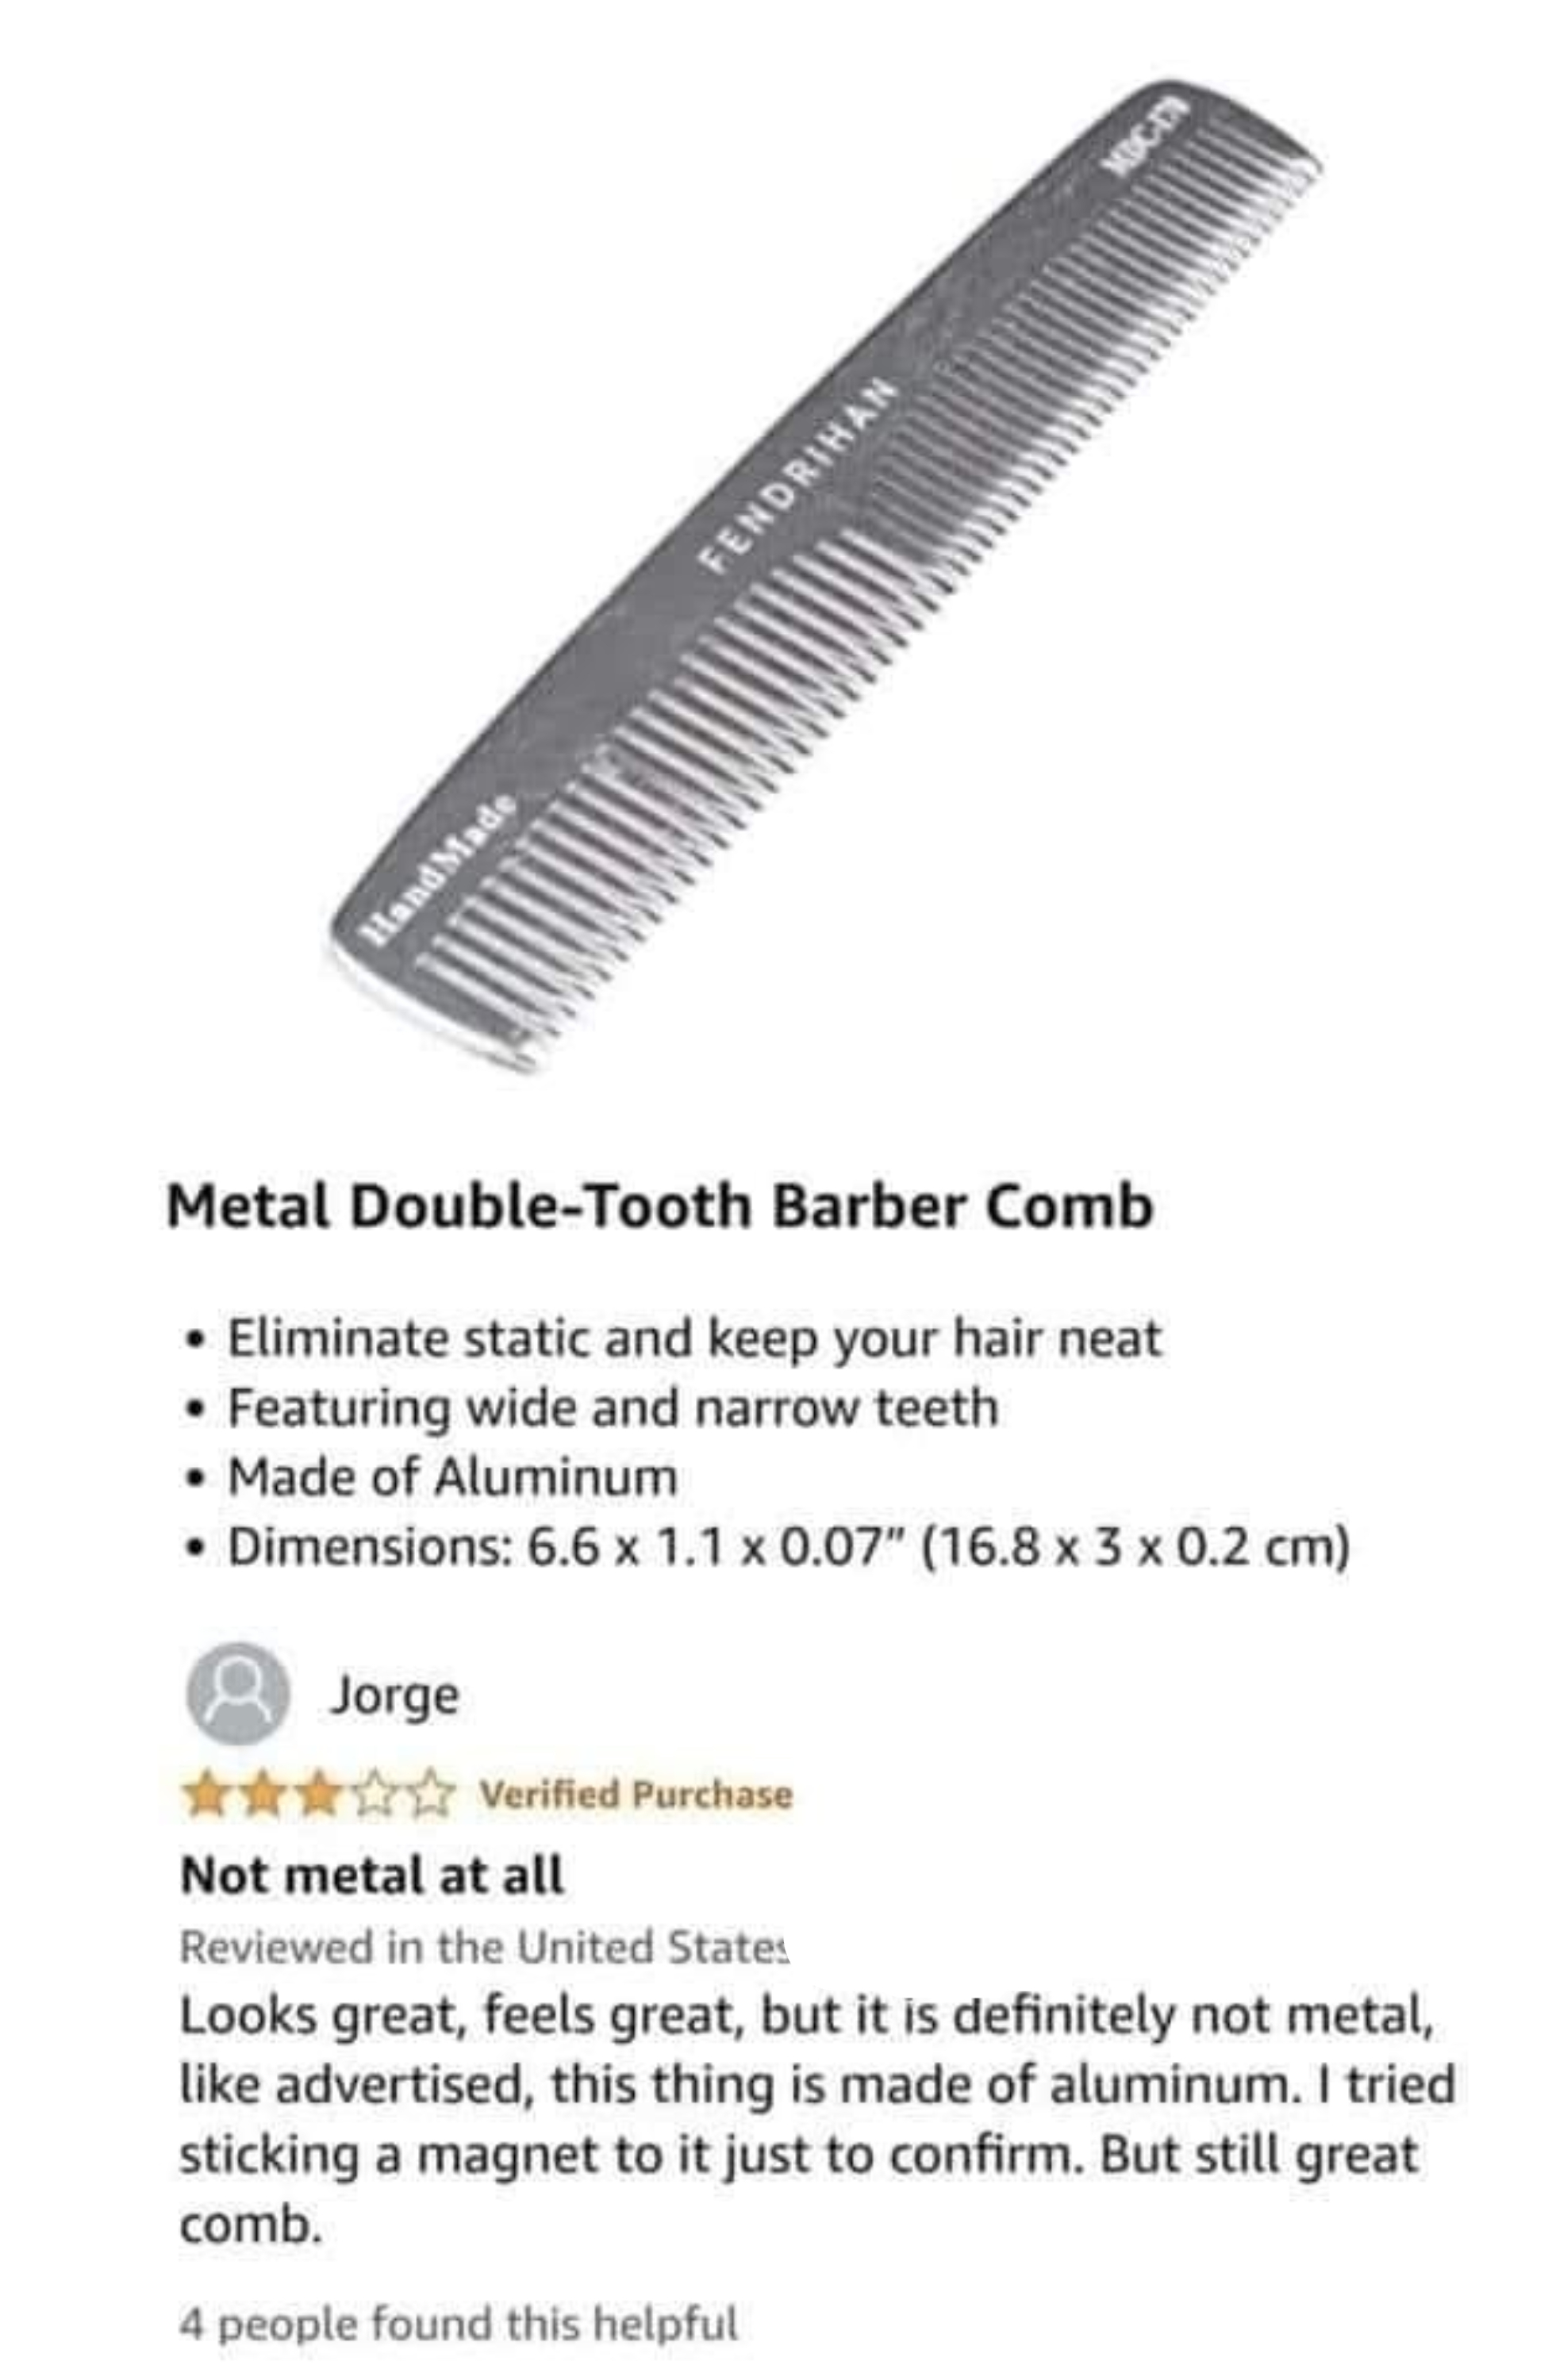 Comb with double teeth for hair grooming made of aluminum, alongside a customer review expressing doubt about material but satisfaction with quality